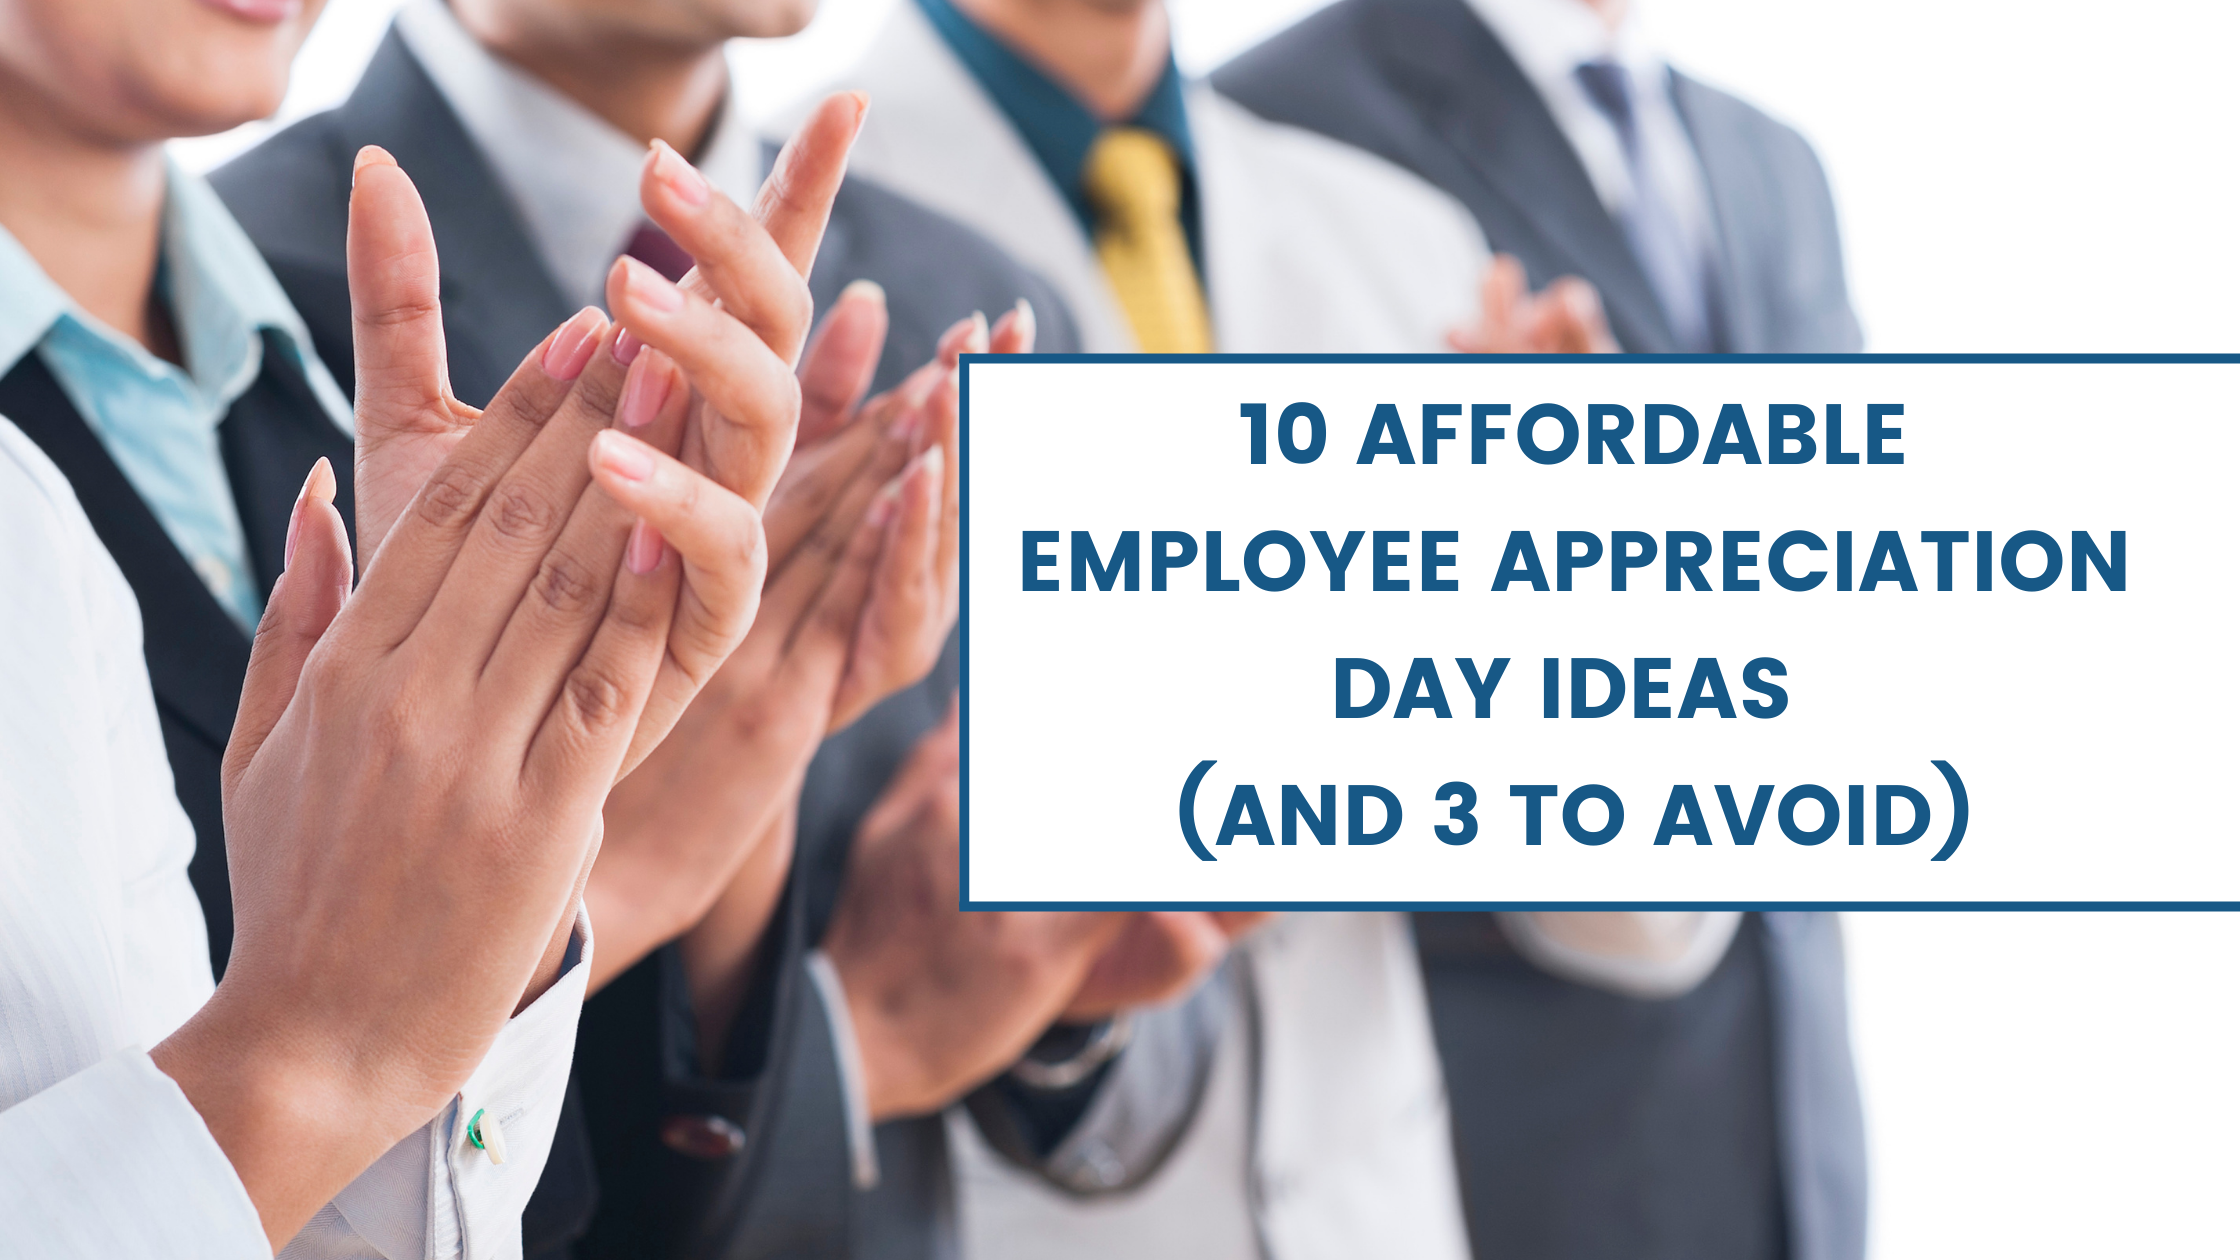 10 Affordable Employee Appreciation Day Ideas (and 3 to Avoid)